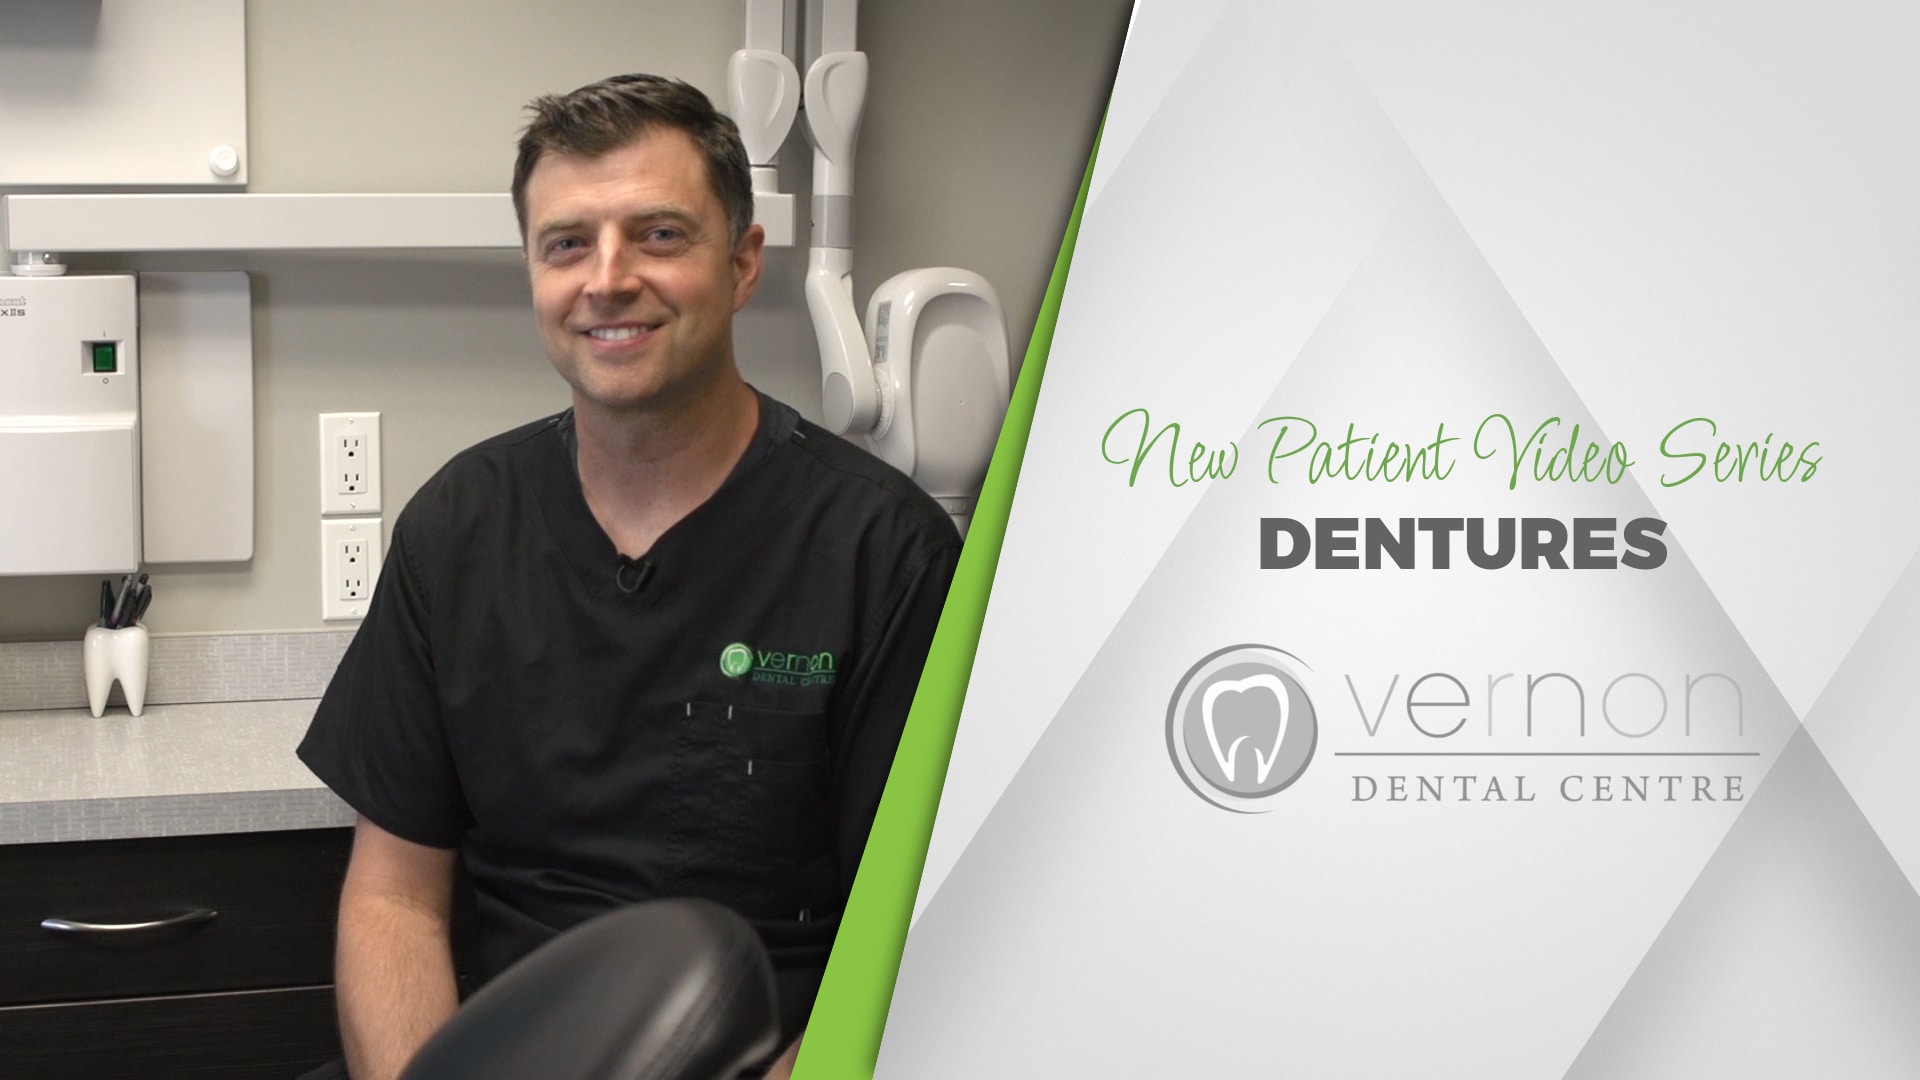 Dr. Anthony Berdan from the Vernon Dental Centre discusses dentures and partial dentures